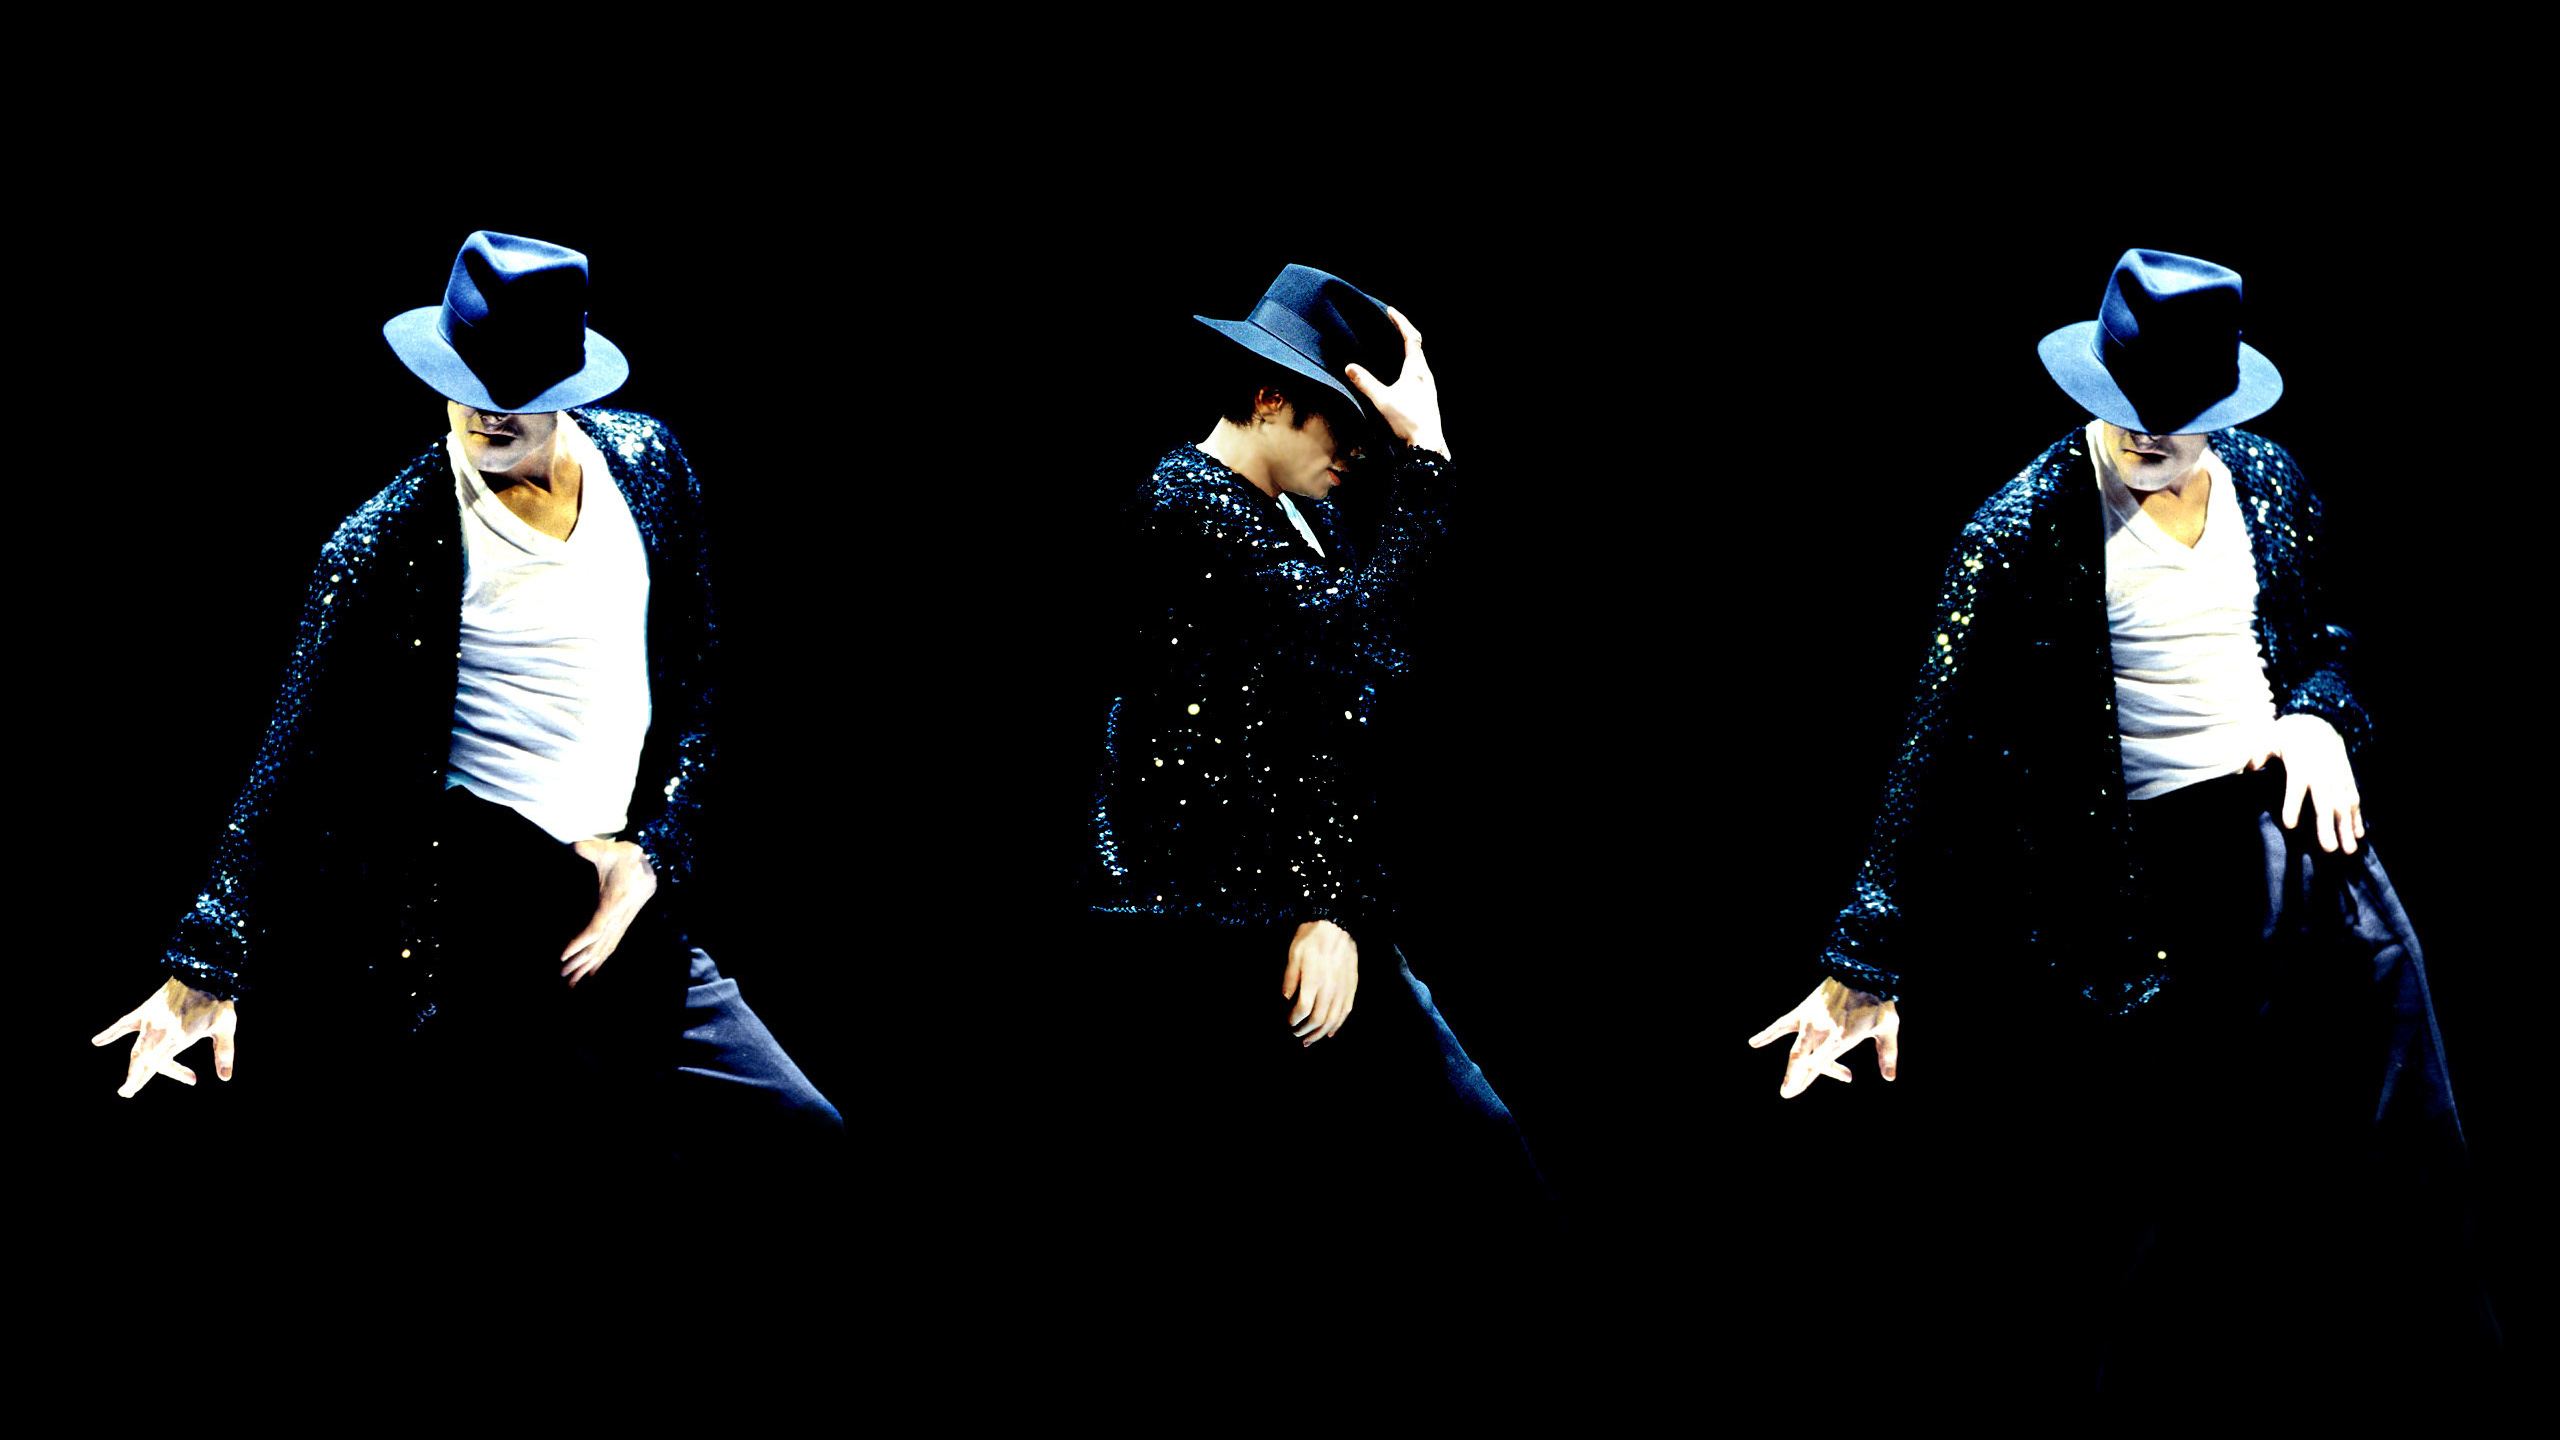 michael jackson images wallpapers #2